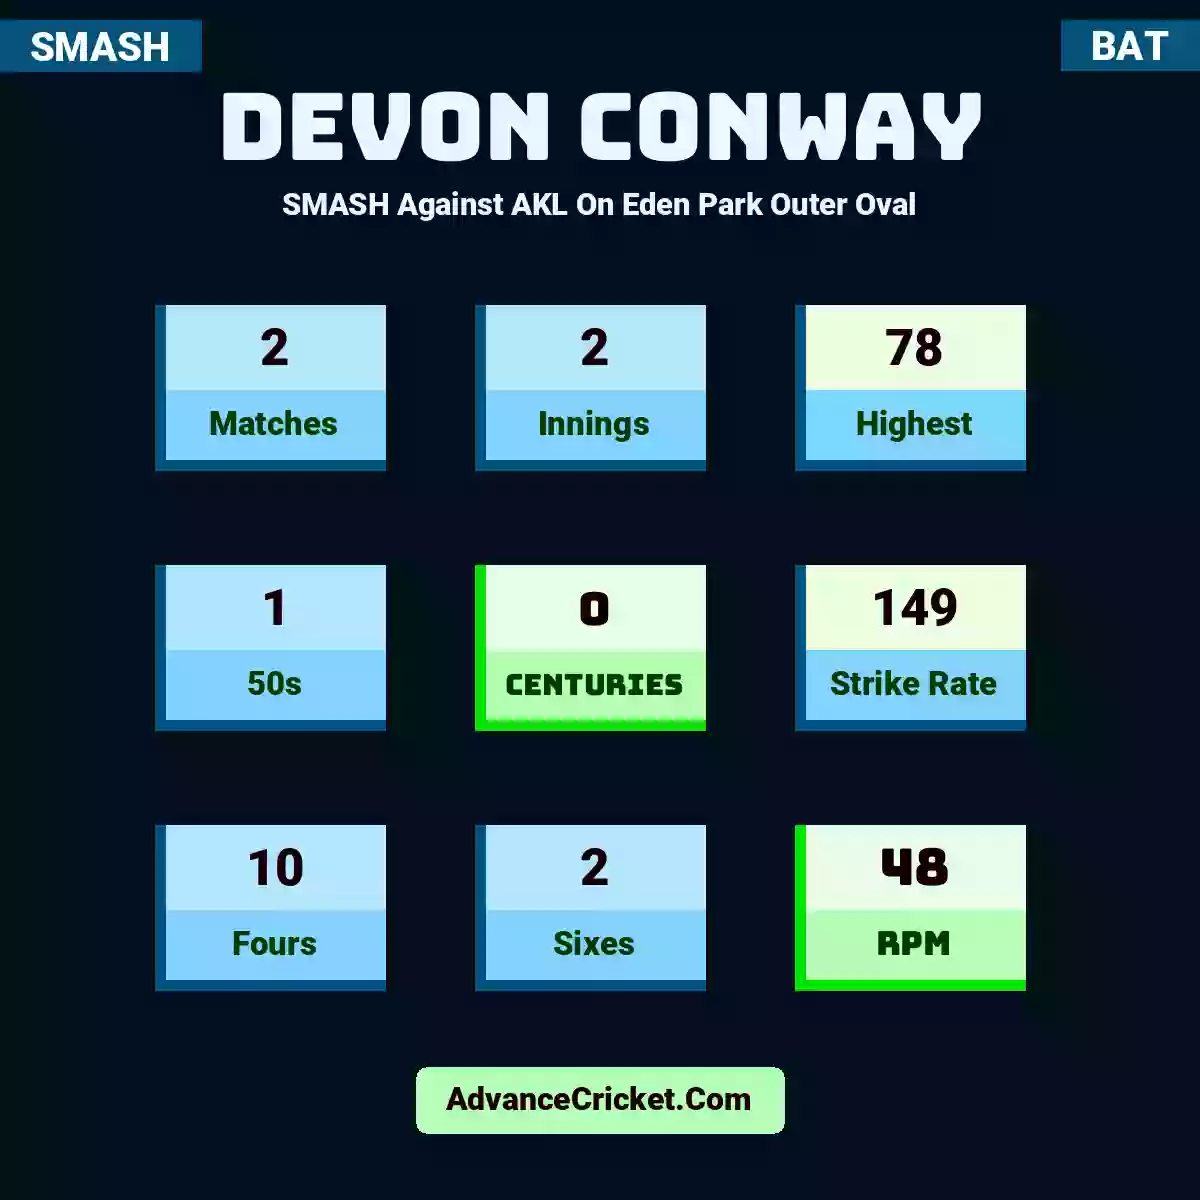 Devon Conway SMASH  Against AKL On Eden Park Outer Oval, Devon Conway played 2 matches, scored 78 runs as highest, 1 half-centuries, and 0 centuries, with a strike rate of 149. D.Conway hit 10 fours and 2 sixes, with an RPM of 48.